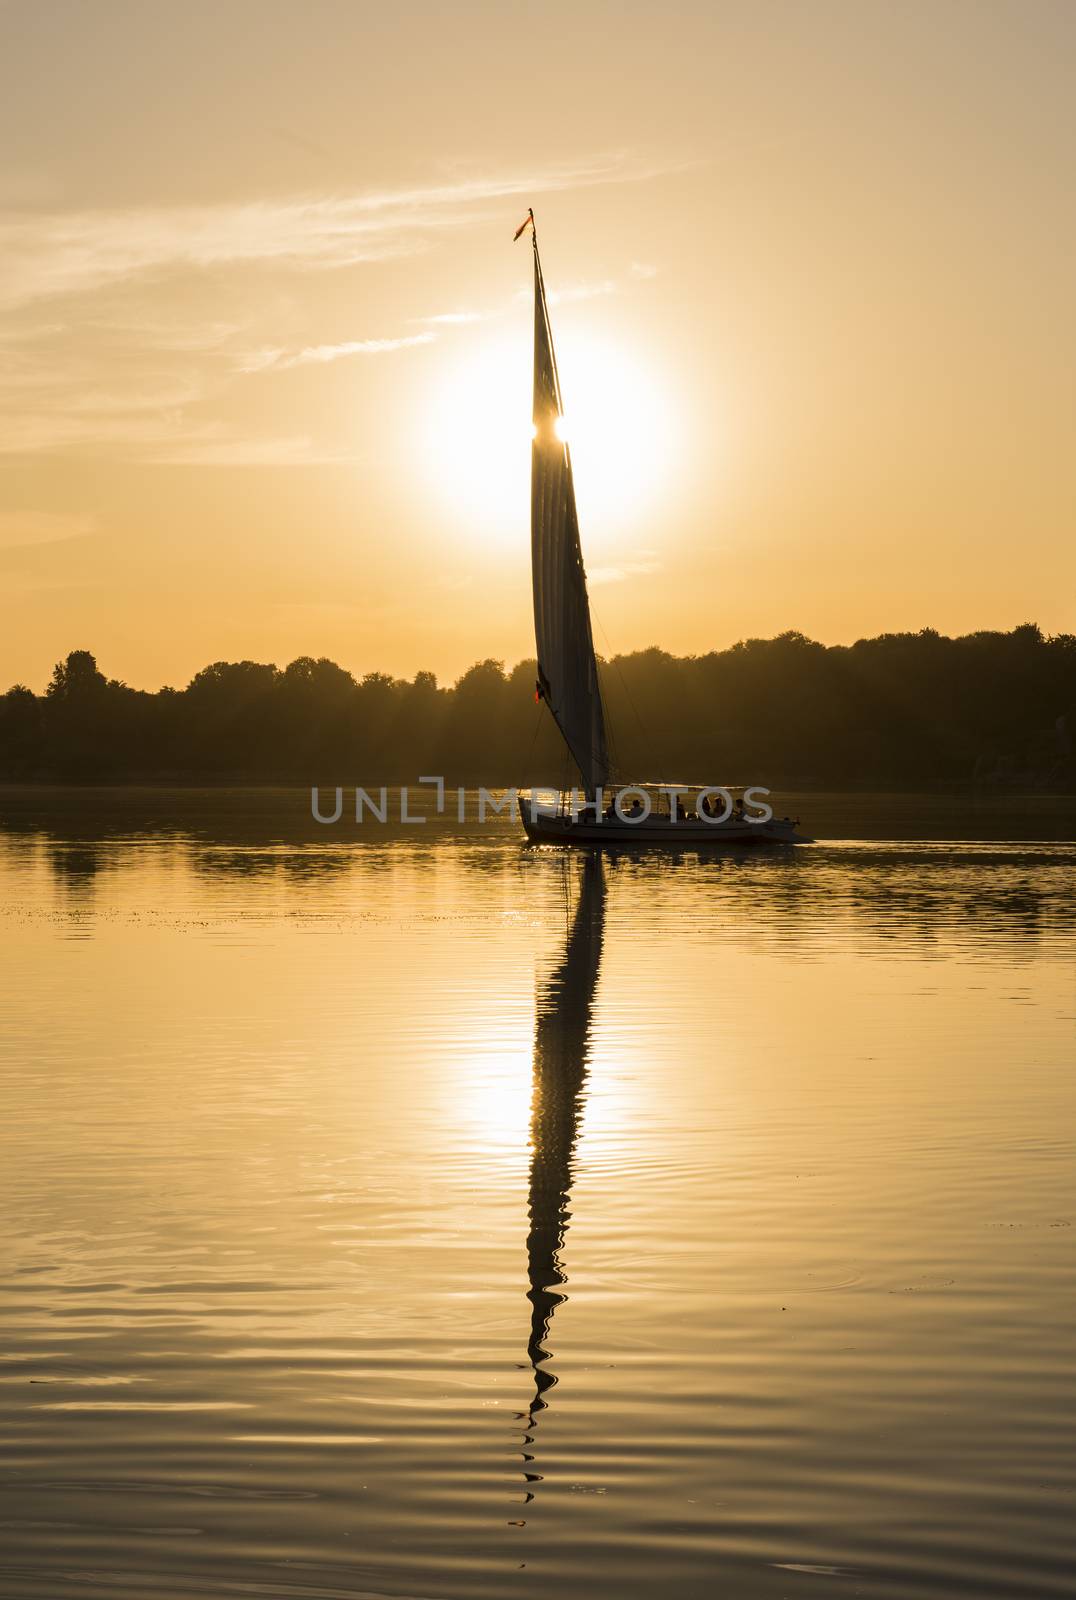 Traditional egyptian felluca sailing boat on river Nile in silhouette at dusk sunset